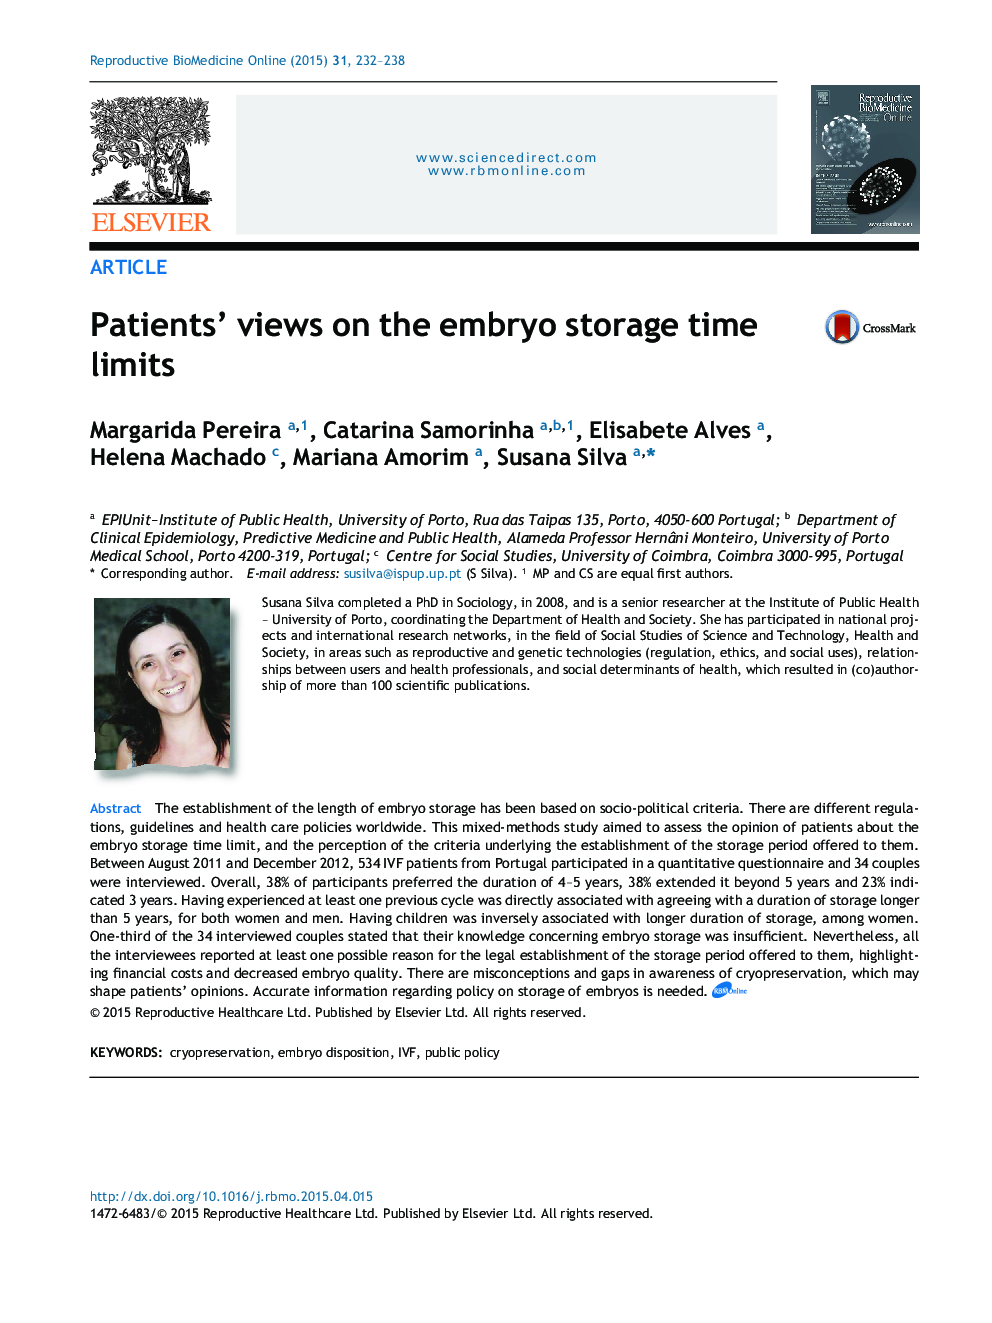 Patients' views on the embryo storage time limits